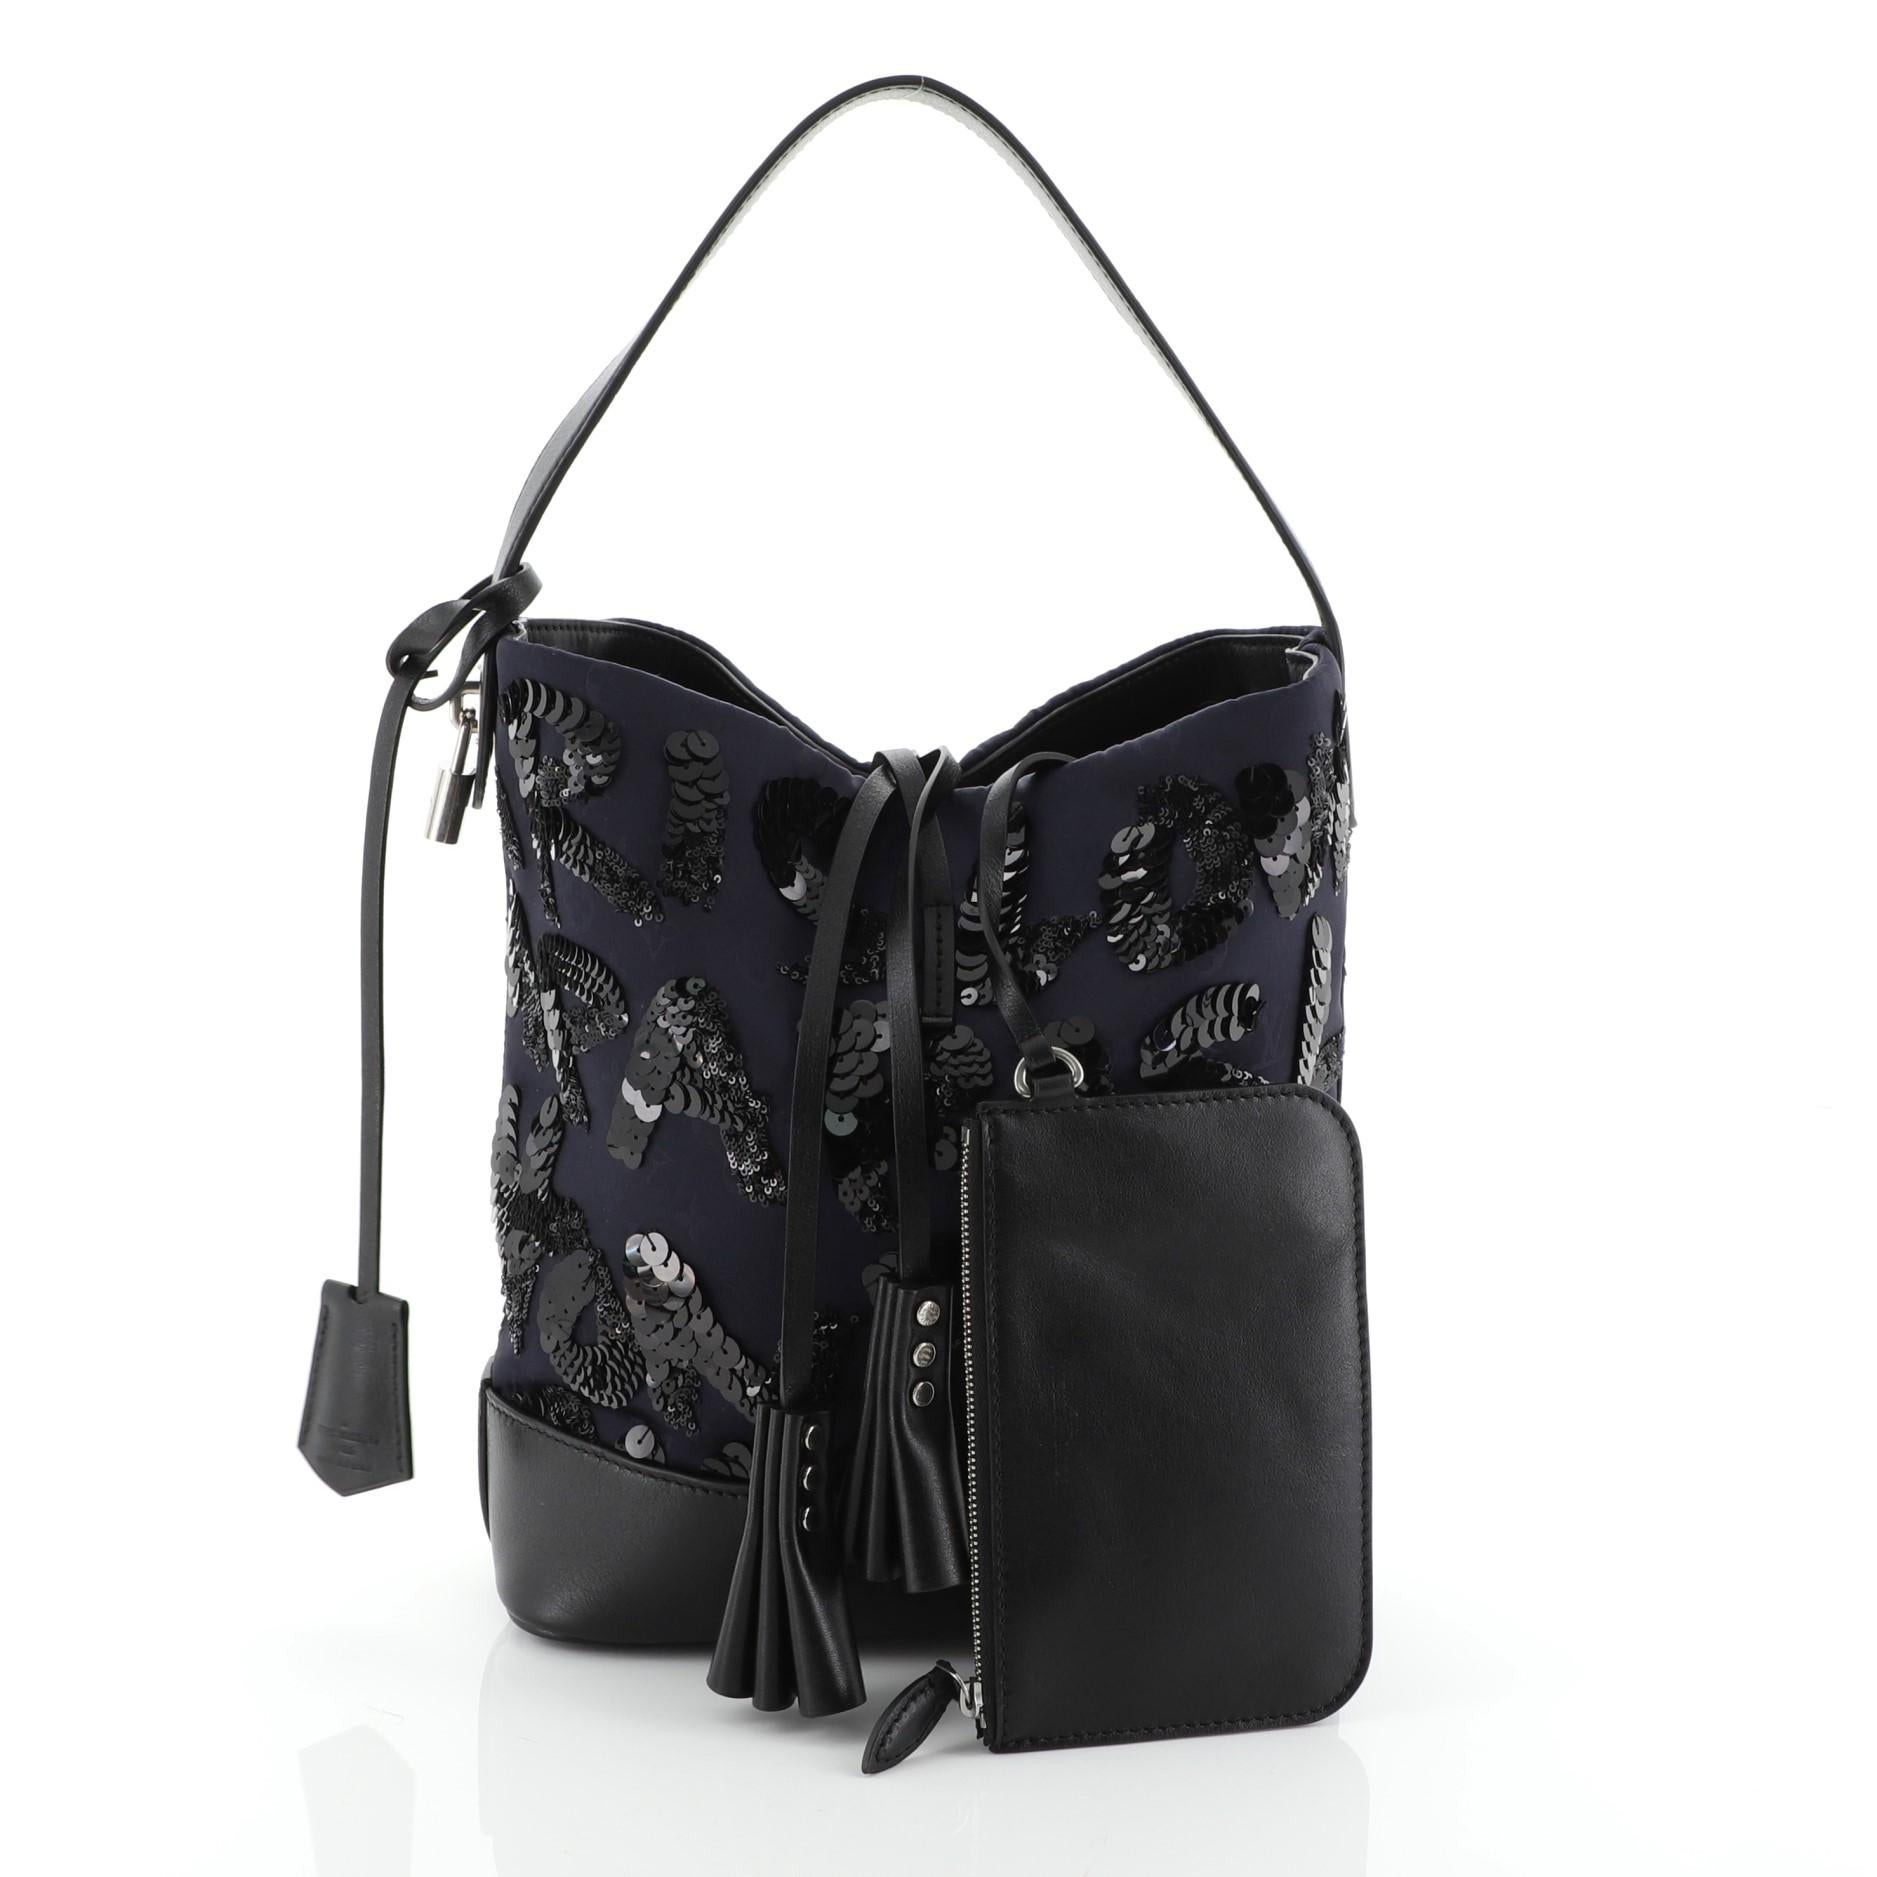 This Louis Vuitton NN14 Spotlight Bucket Bag Sequin Graffiti Monogram Nylon GM, crafted in blue monogram nylon with intricate black sequin monogram lettering, features black calfskin leather base, single looped handle, hand-crafted tassel closure,